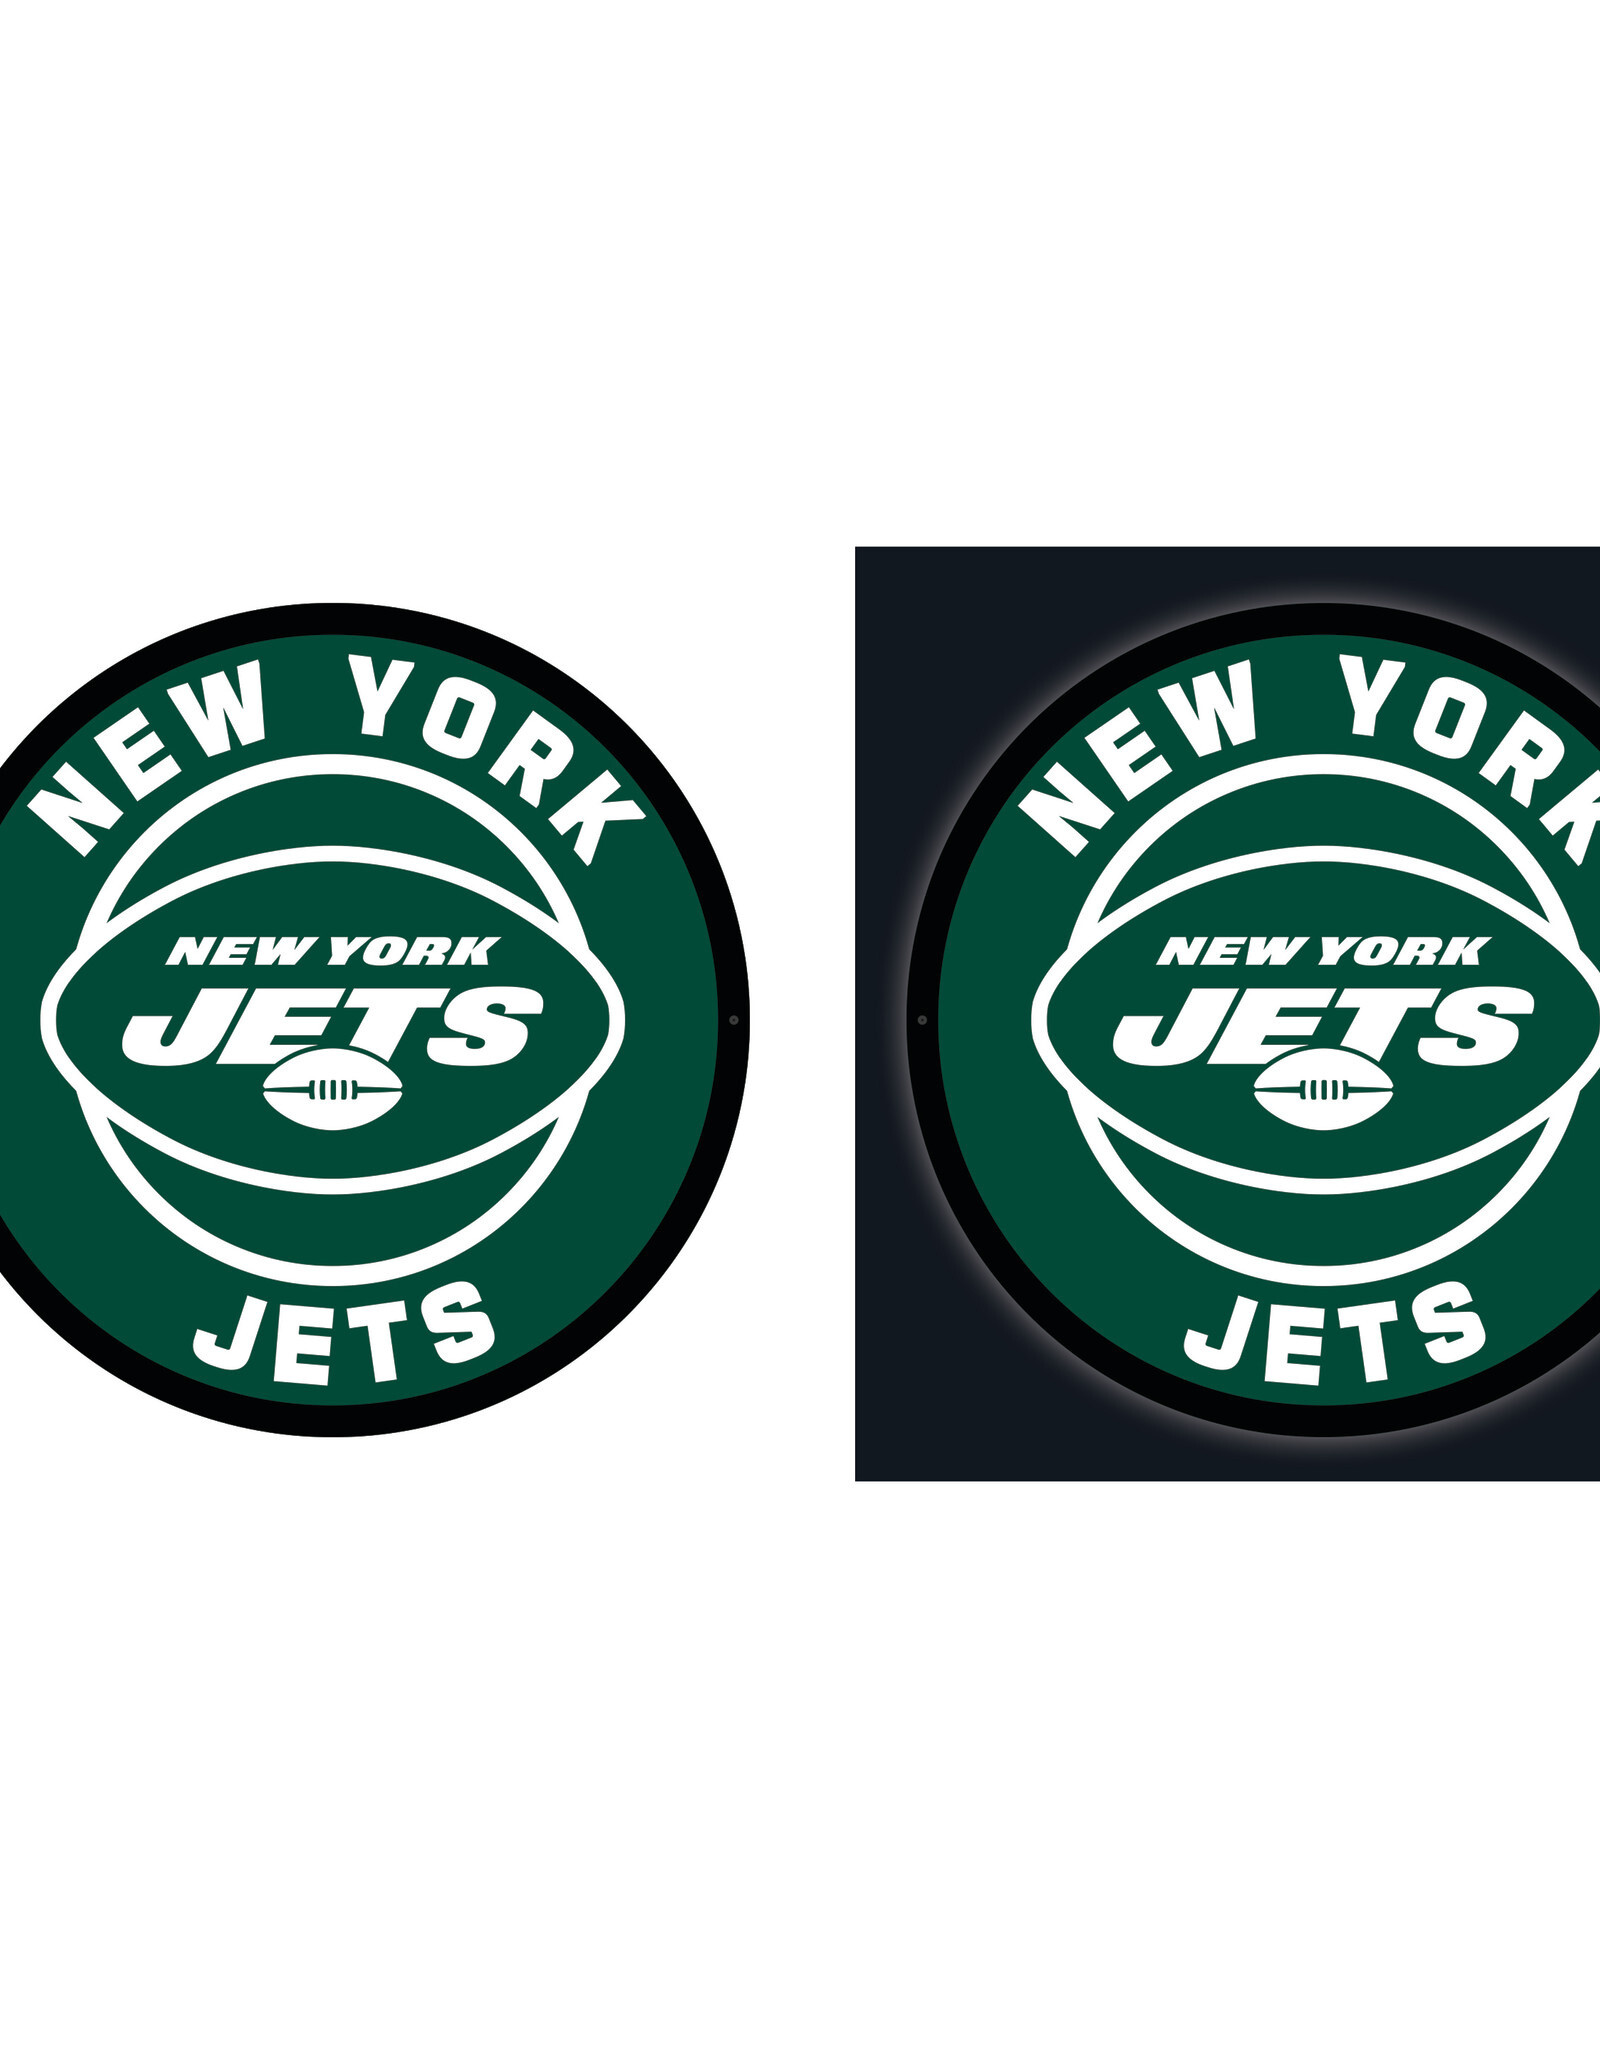 EVERGREEN New York Jets Lighted LED Round Wall Decor